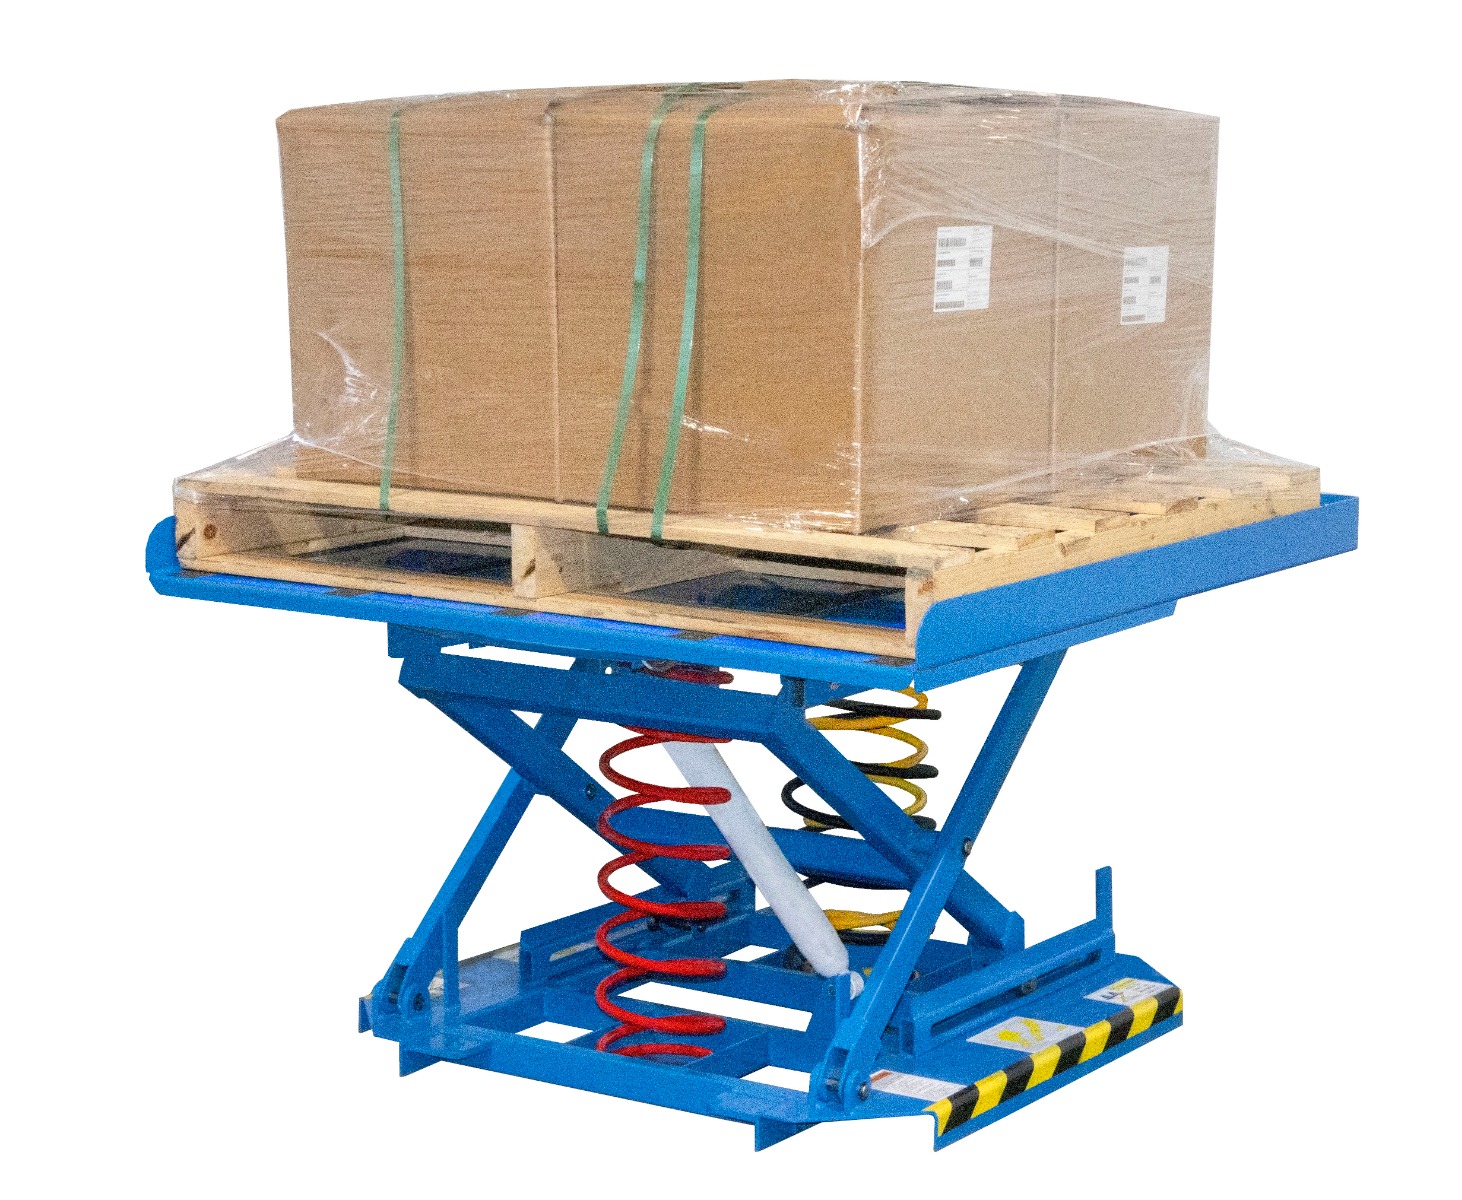 Pallet Carousel and Skid Positioner with square tabletop